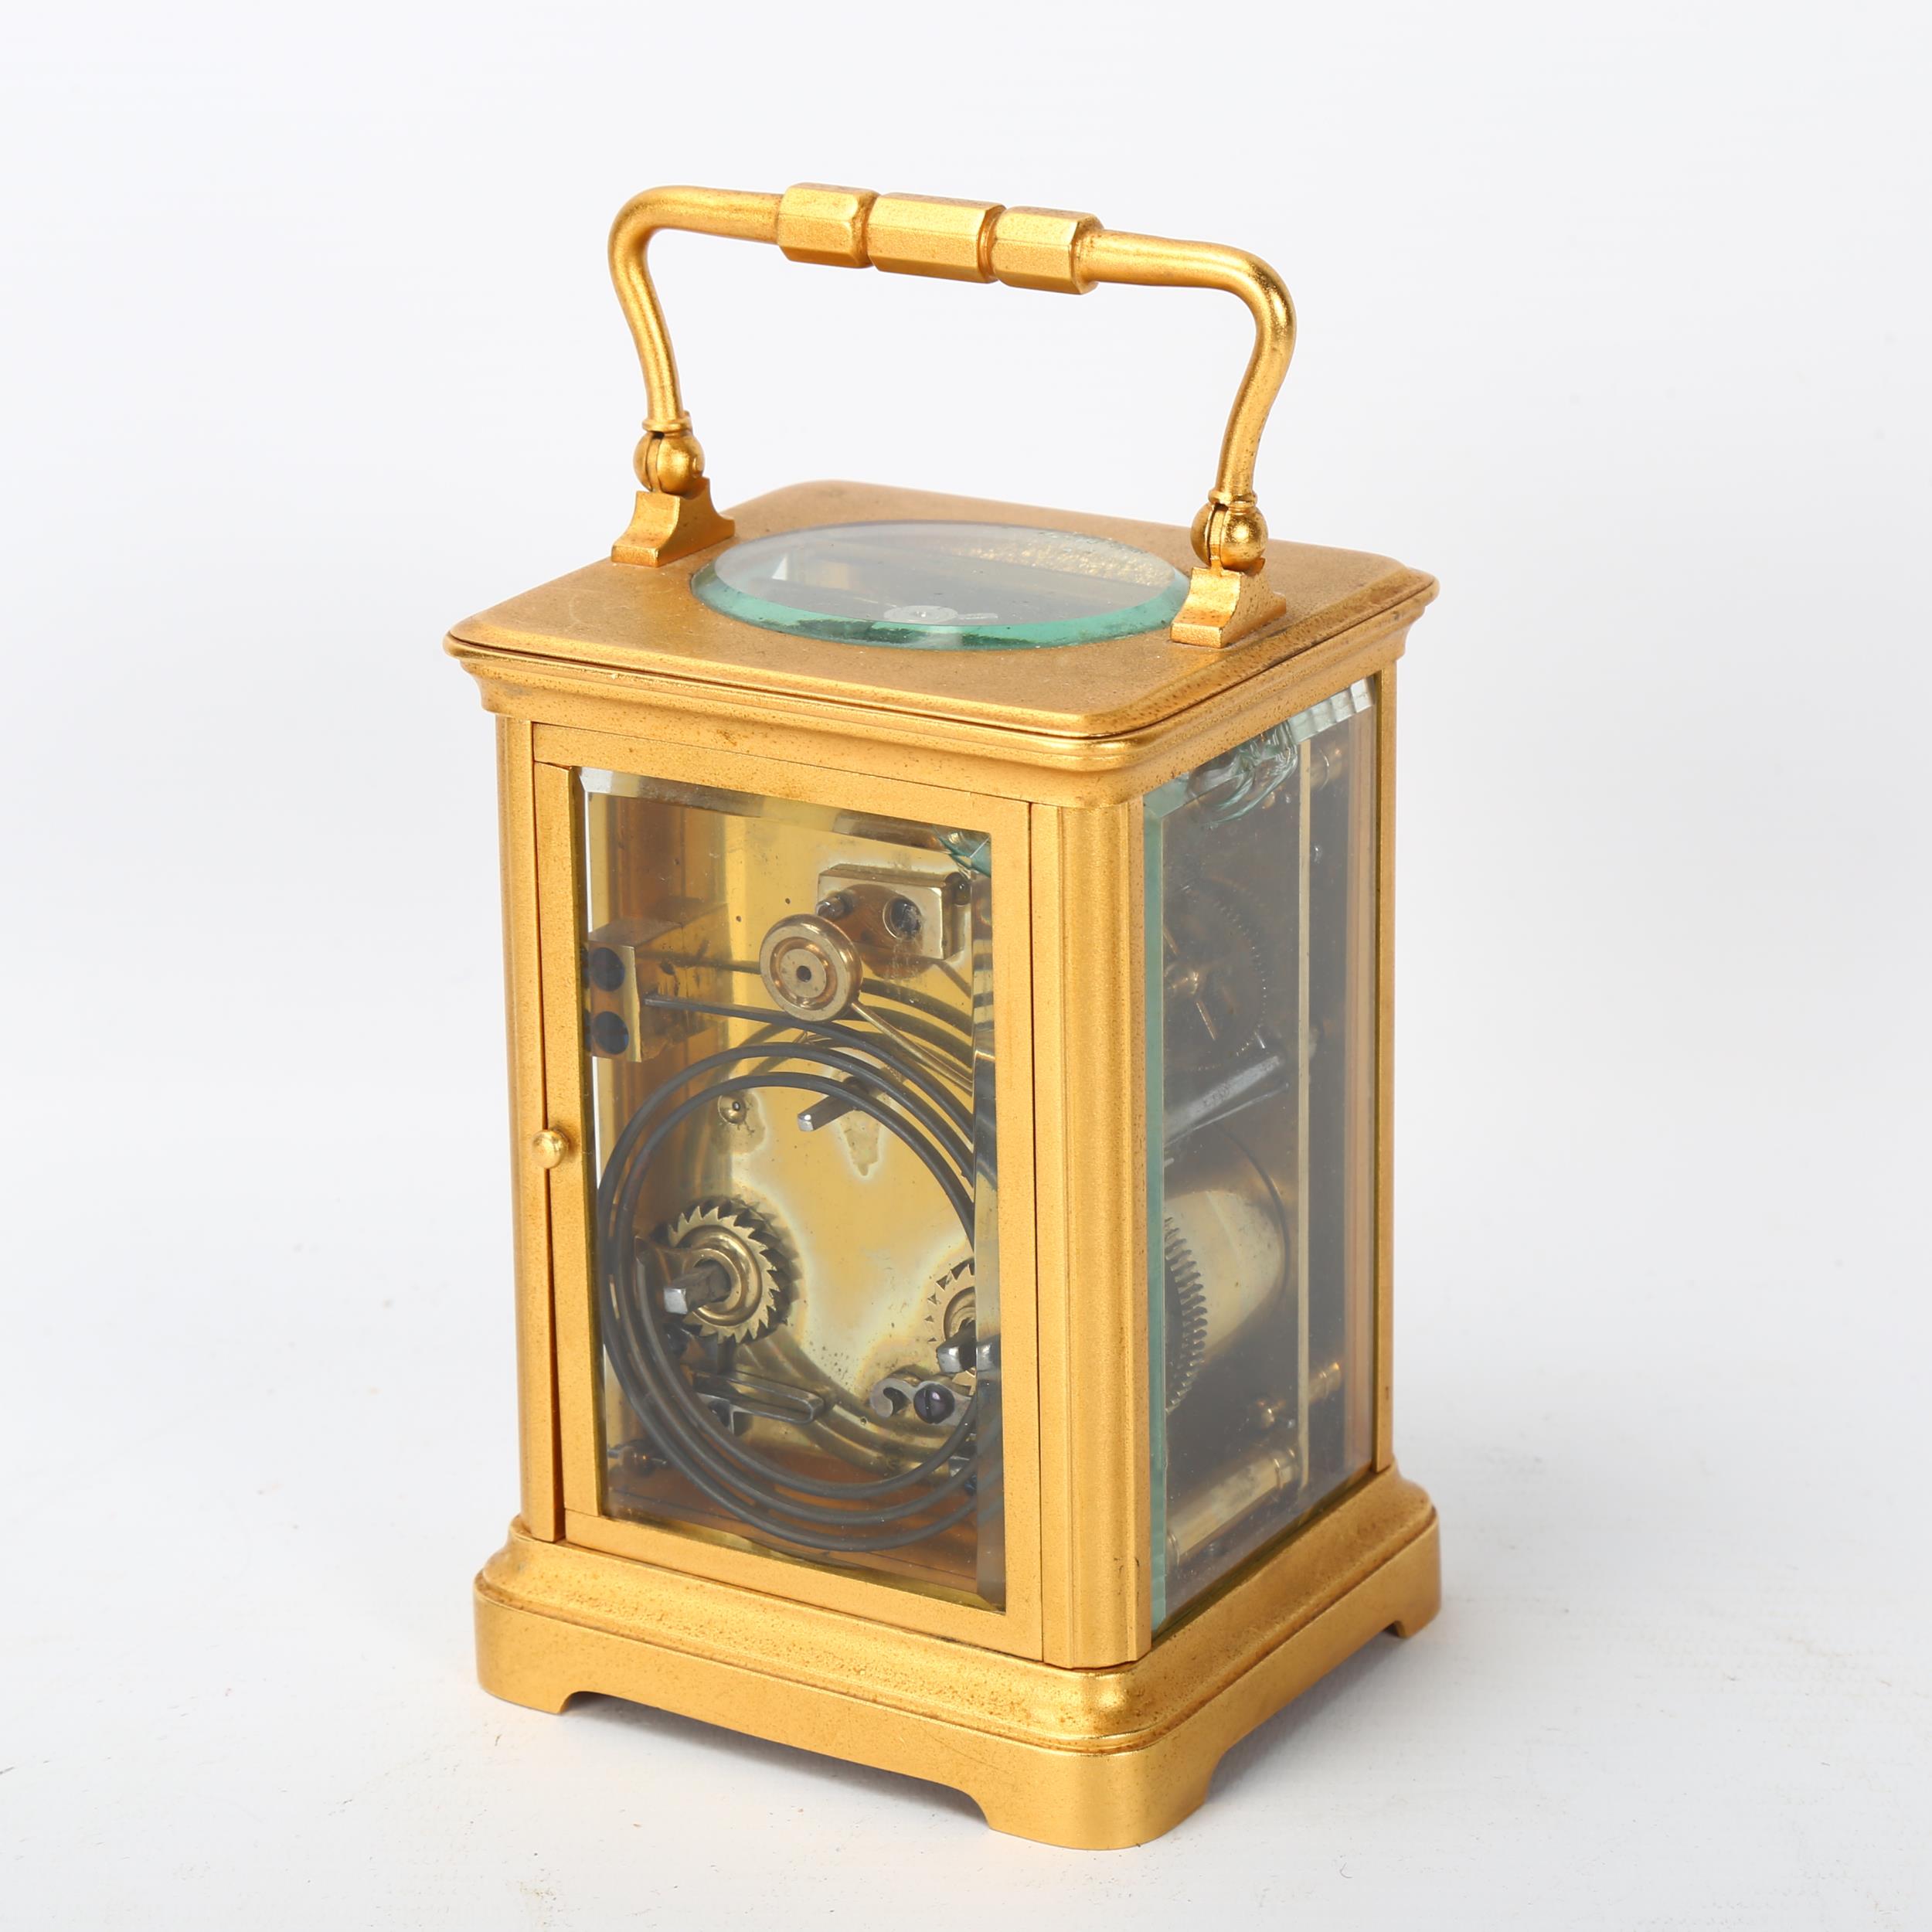 French gilt-brass carriage clock, enamel circular dial in gilded surround, 8-day movement striking - Image 2 of 3